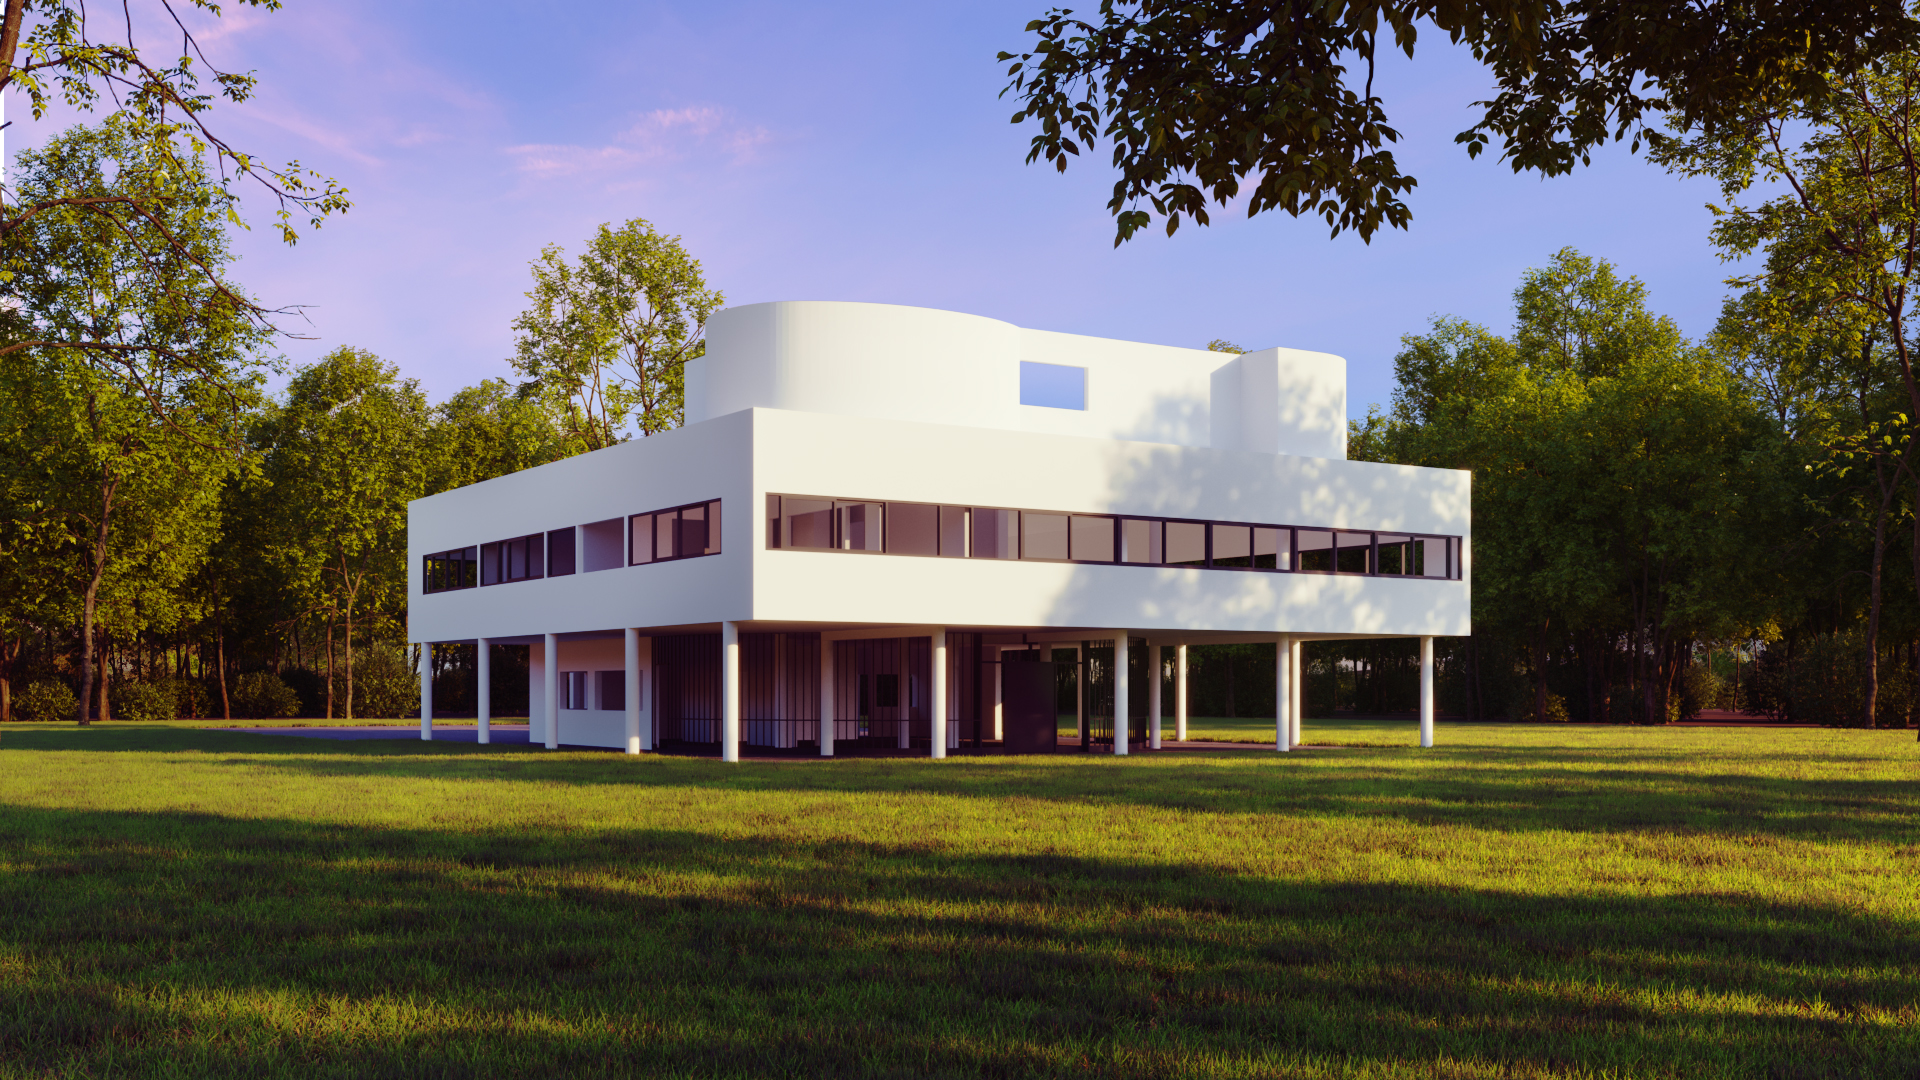 CG Exterior Render Showing a Modern White Building